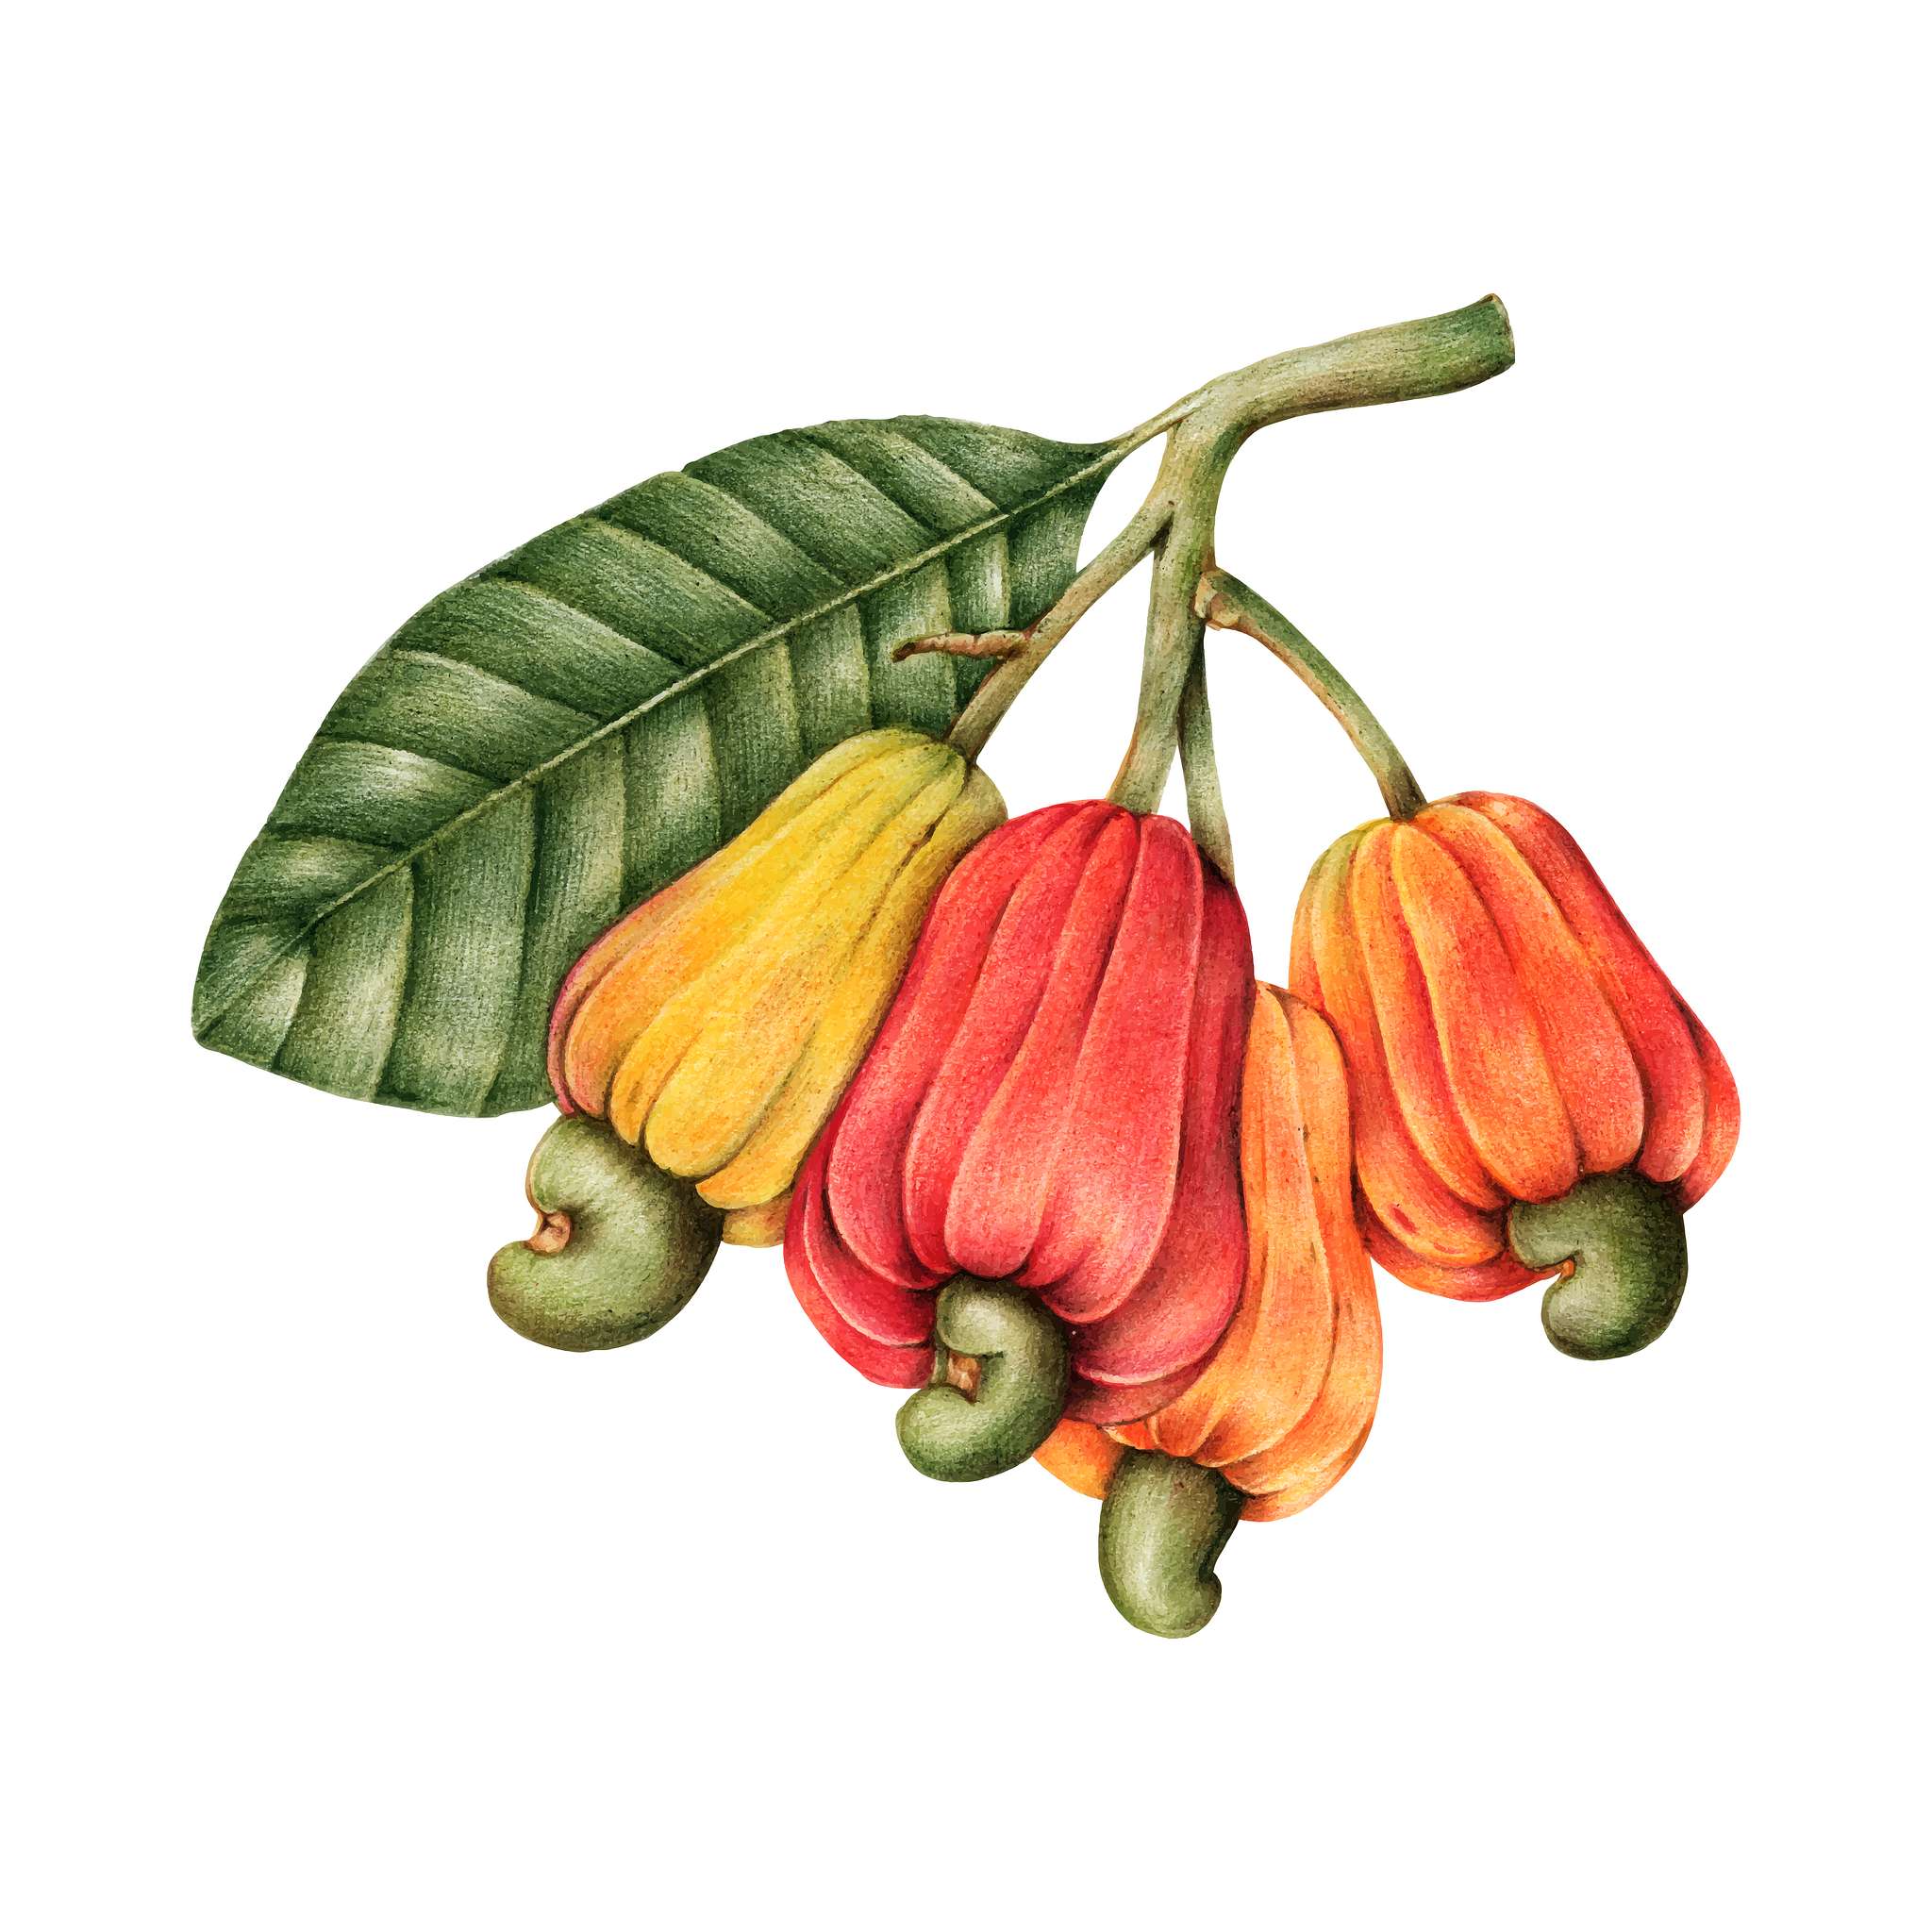 Hand drawn cashew nut and fruits ID 410148